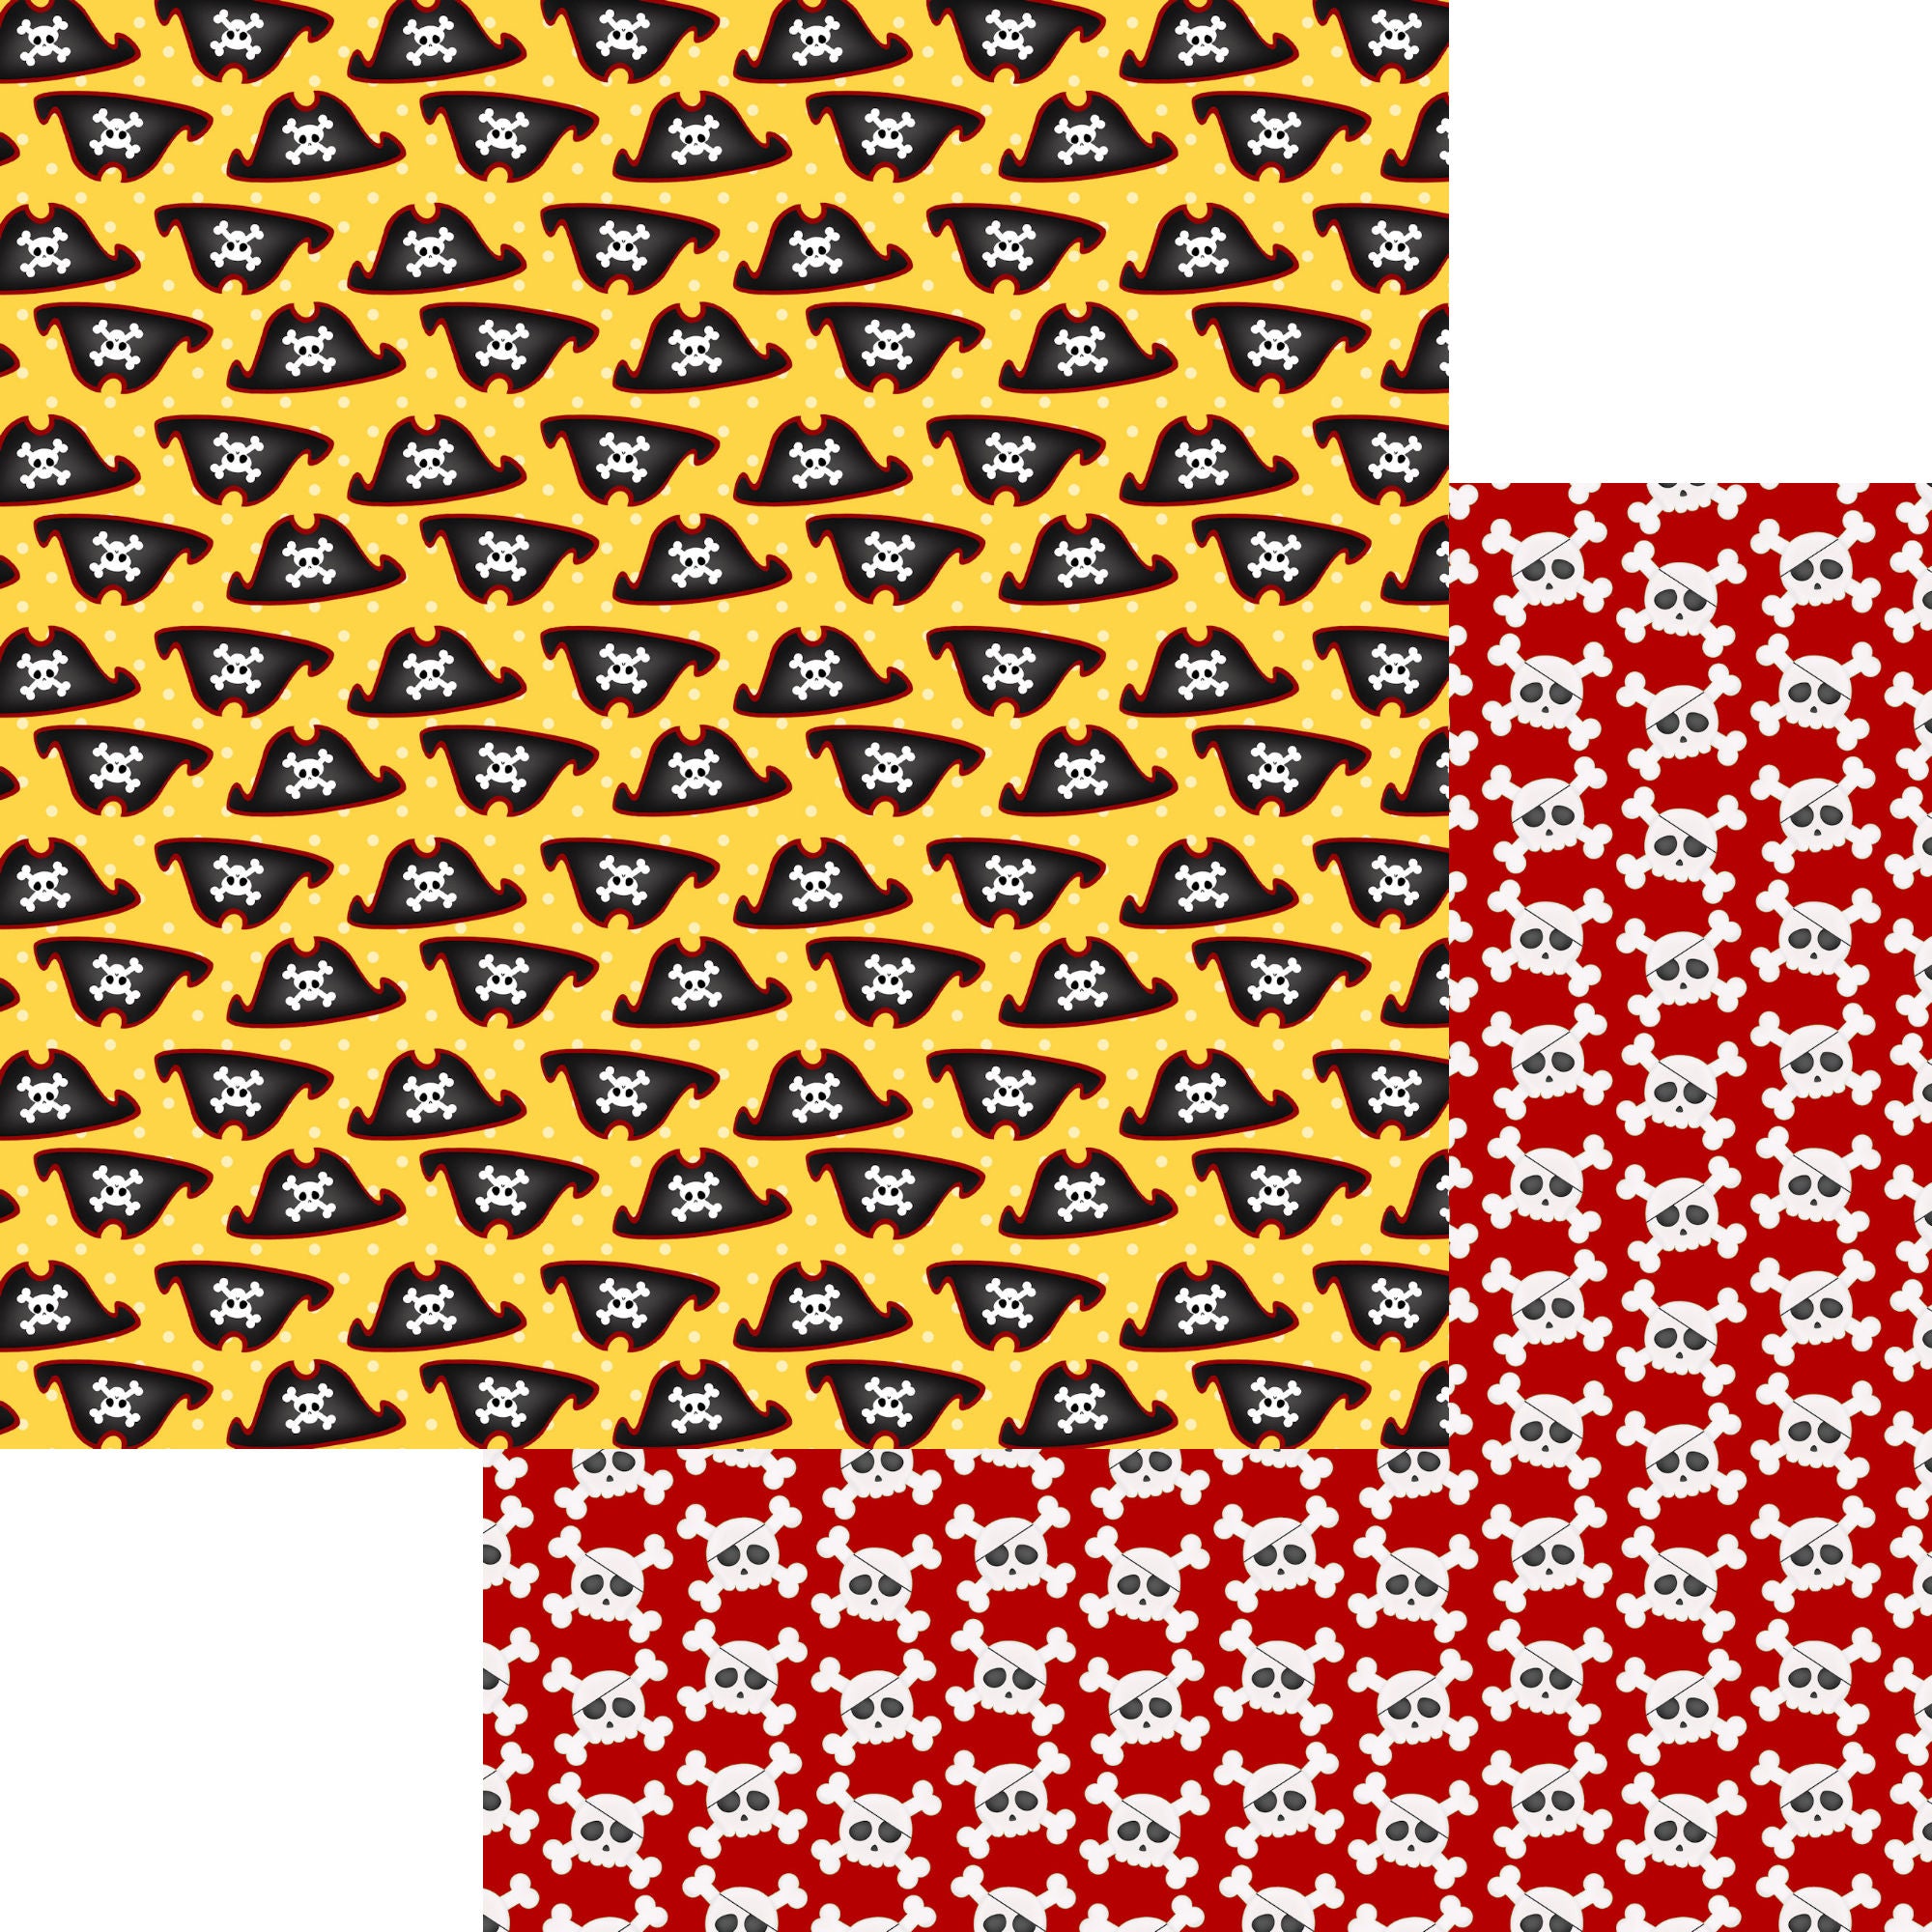 Ahoy Matey Collection Skull & Crossbones 12 x 12 Double-Sided Scrapbook Paper by SSC Designs